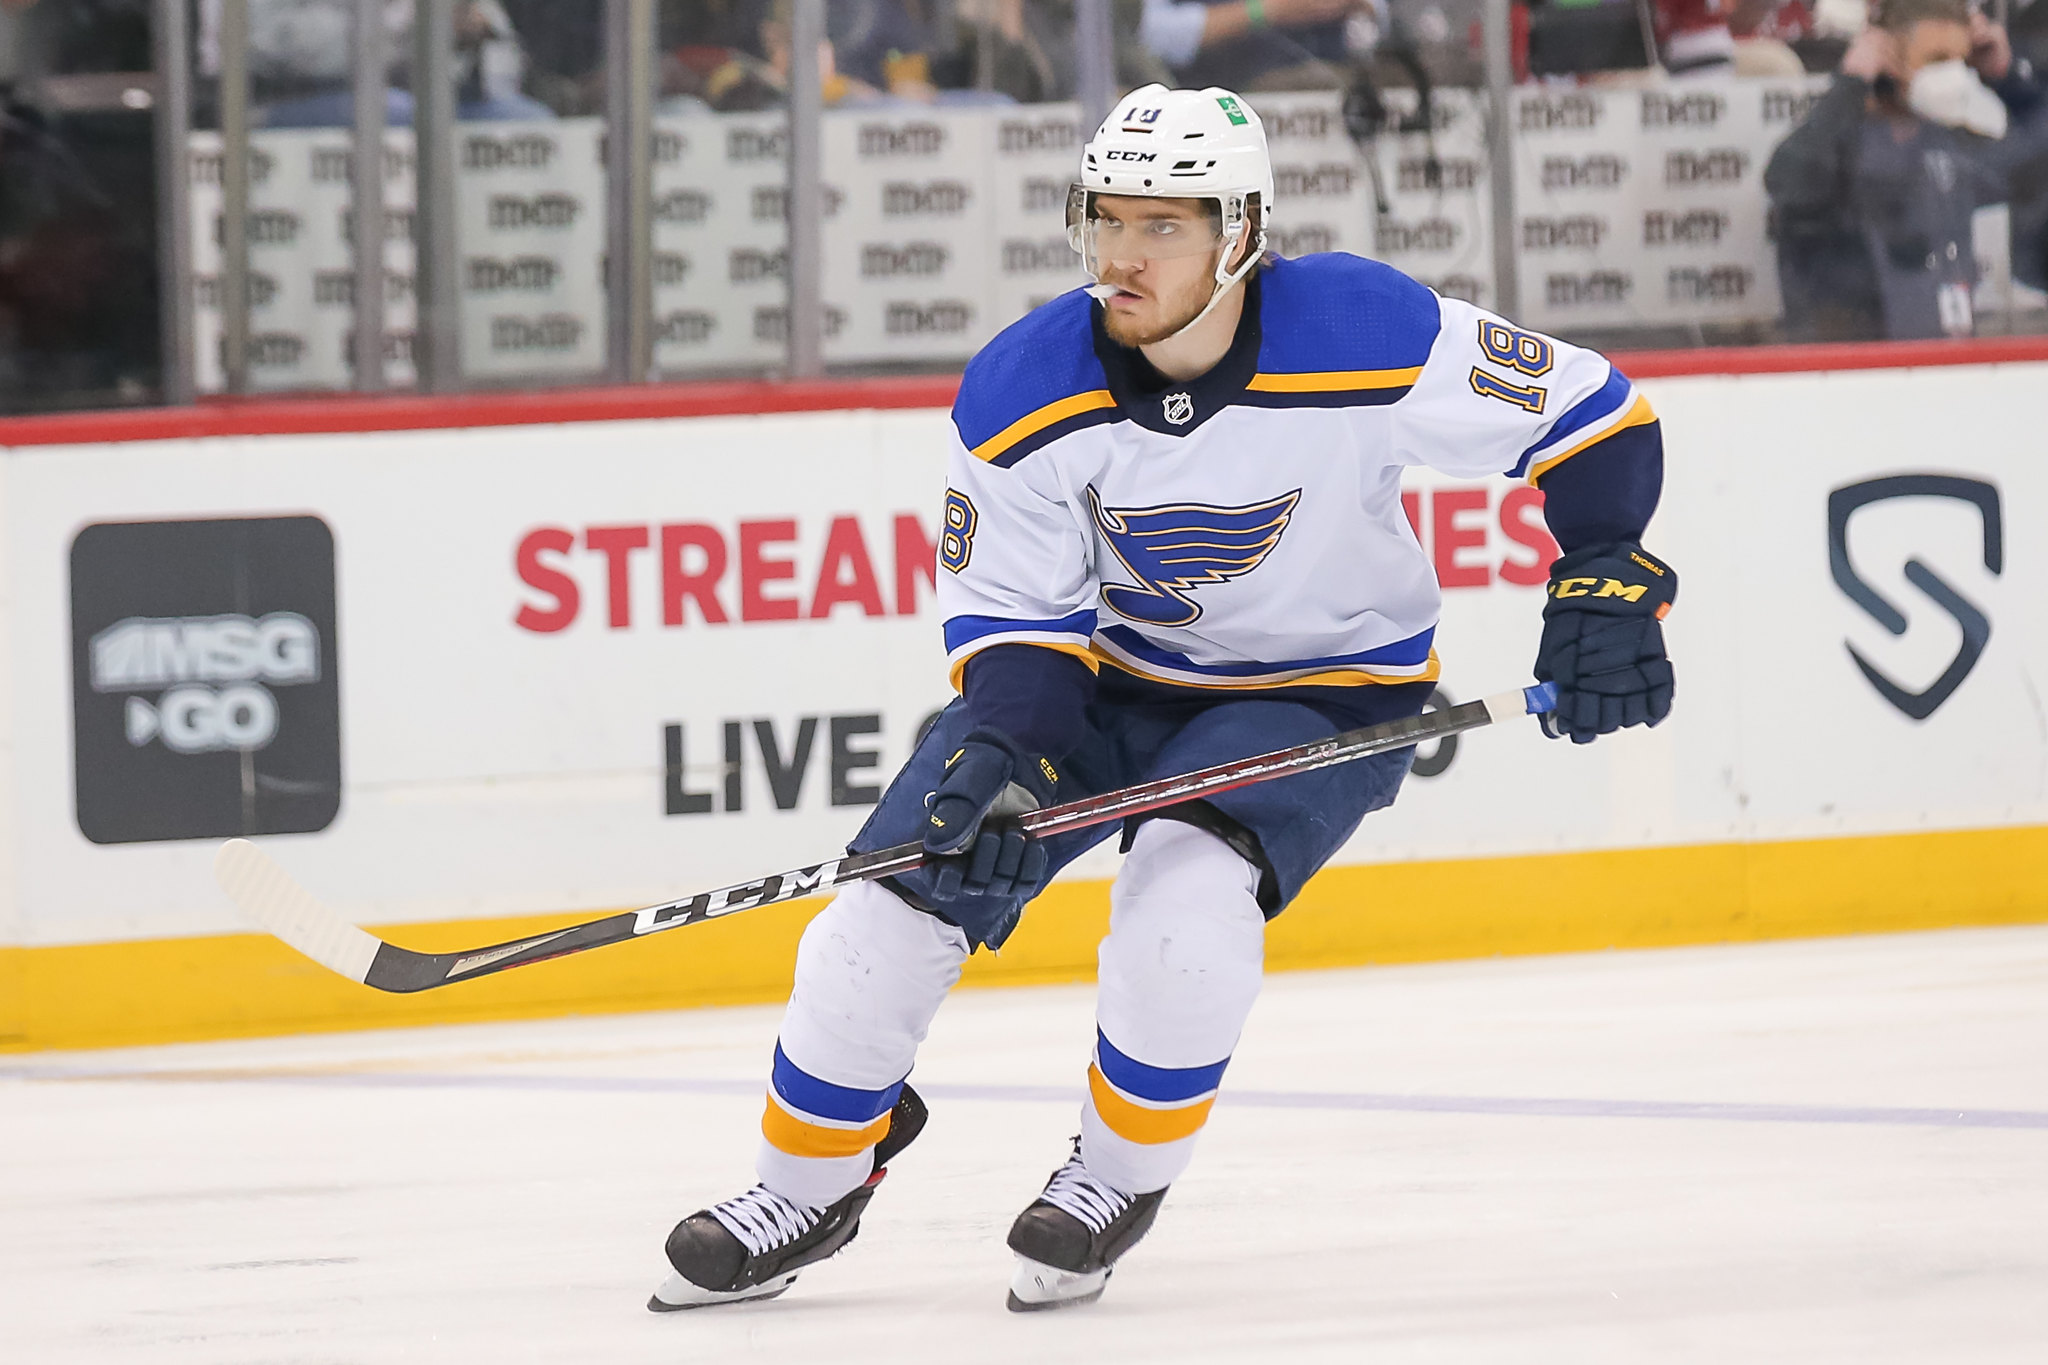 NHL News: The Blues Re-Sign Robert Thomas, and the Wild Re-Sign